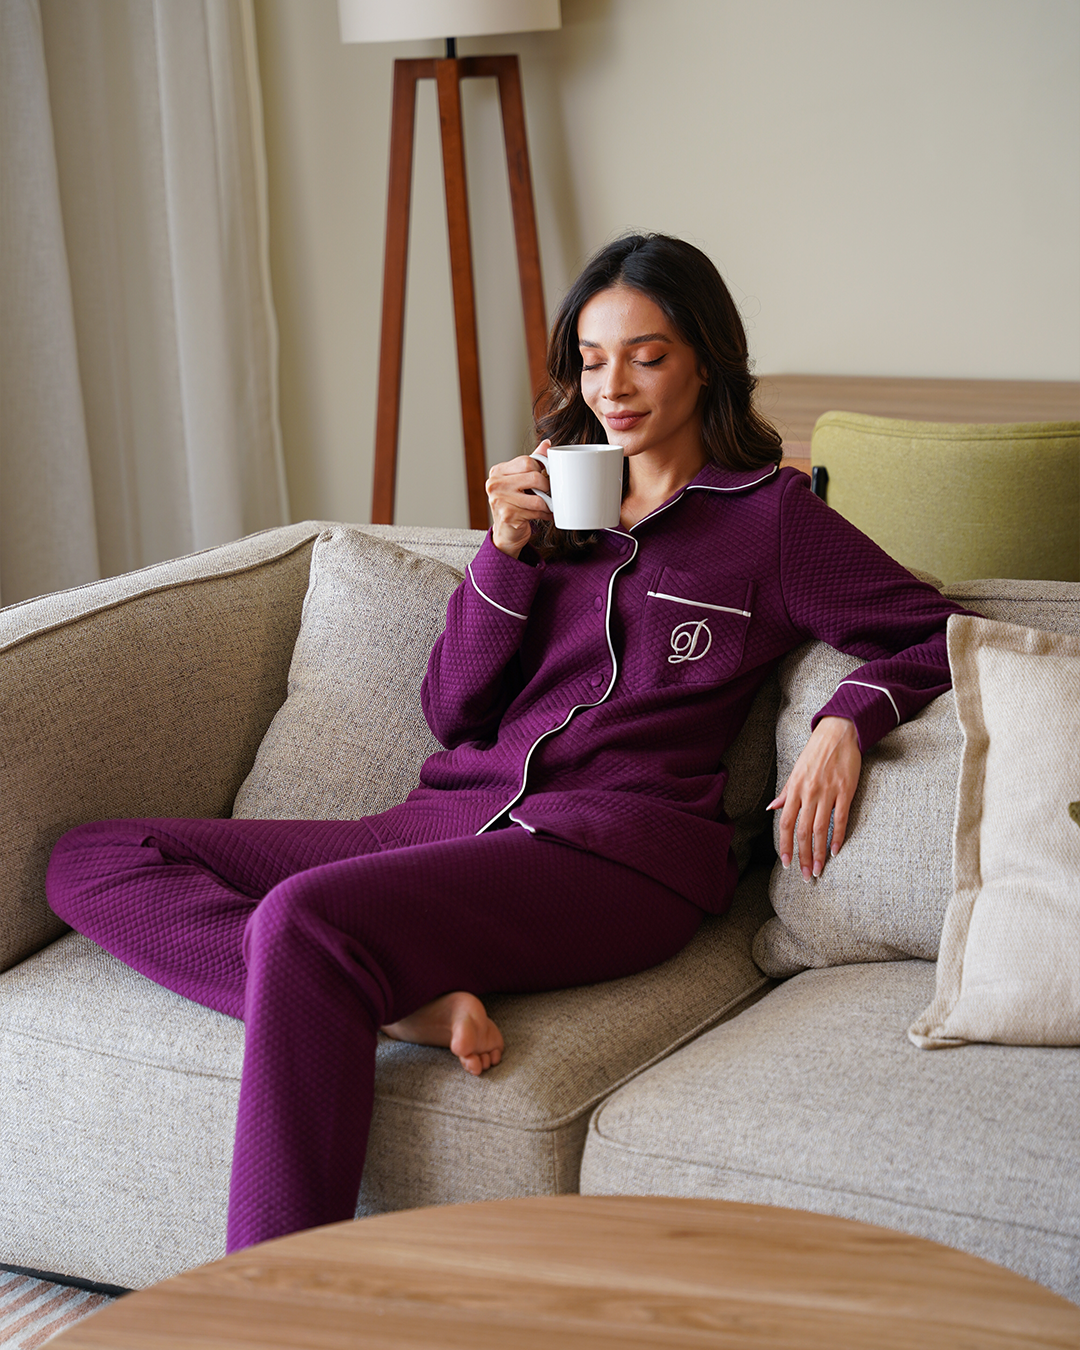 D Women's open pajamas with embroidery on the pocket as a caponet